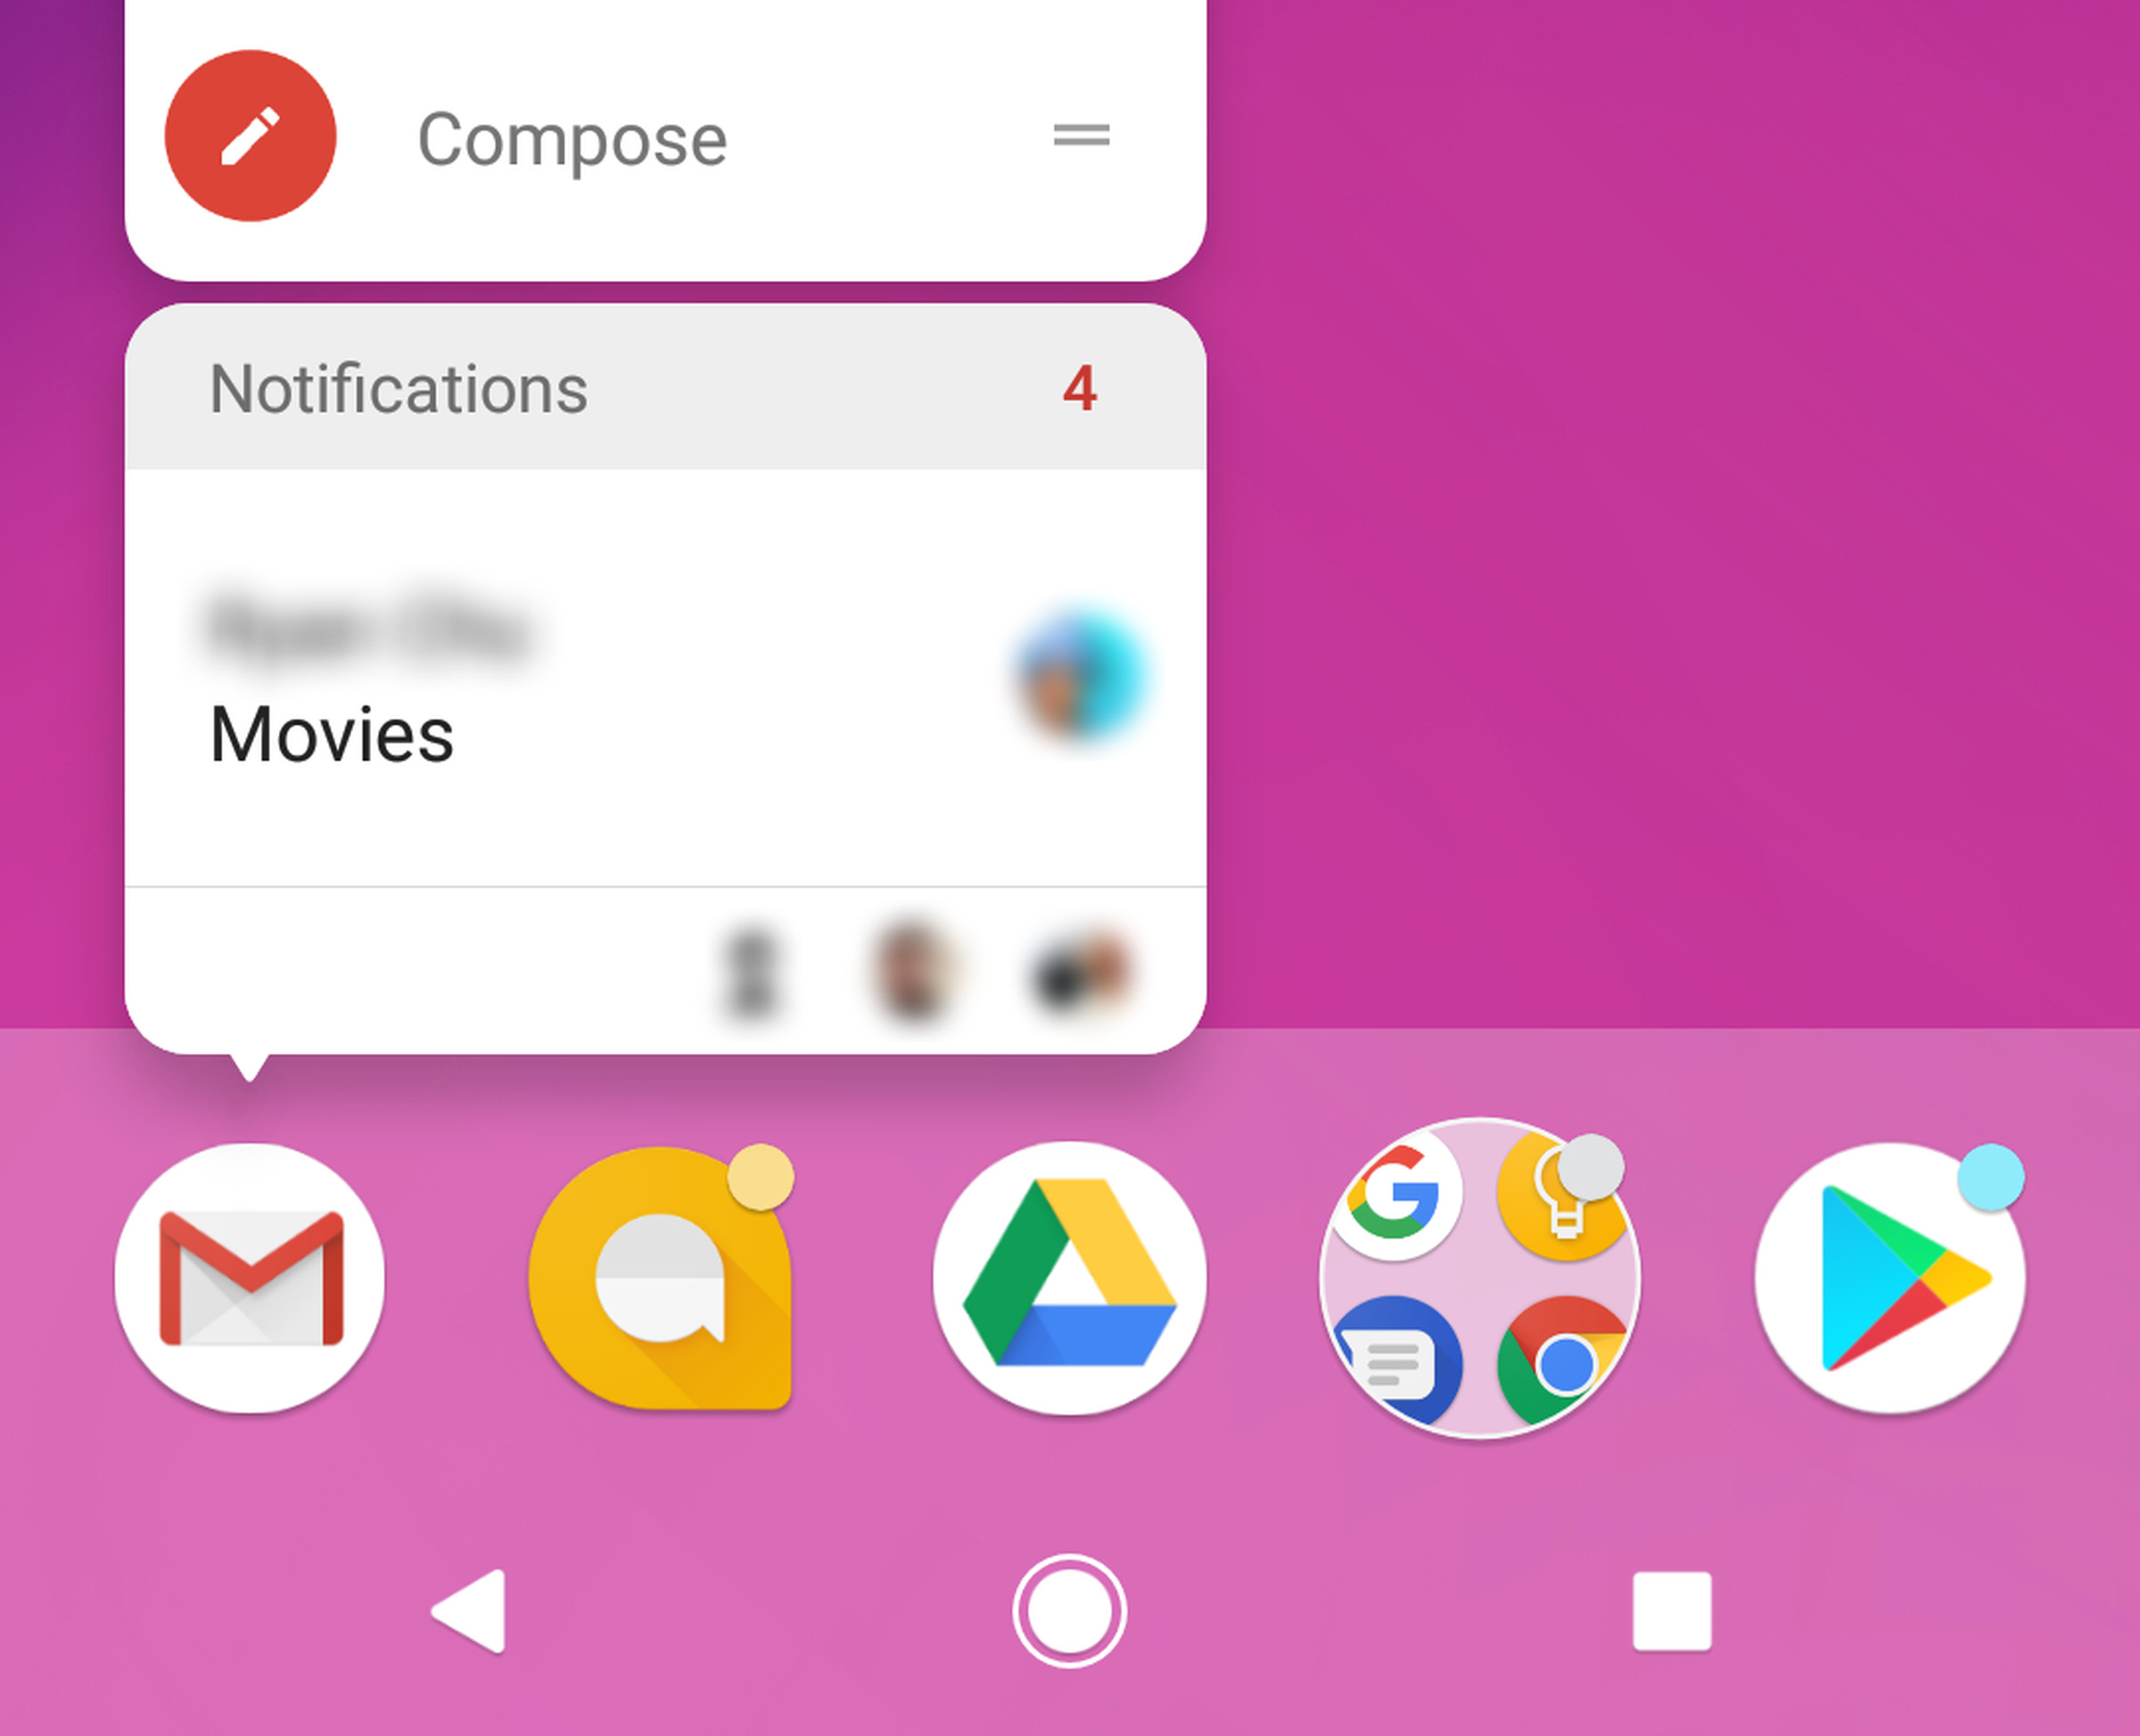 Notification badges are a new feature of Android O and can be long-pressed for a preview of the notification.